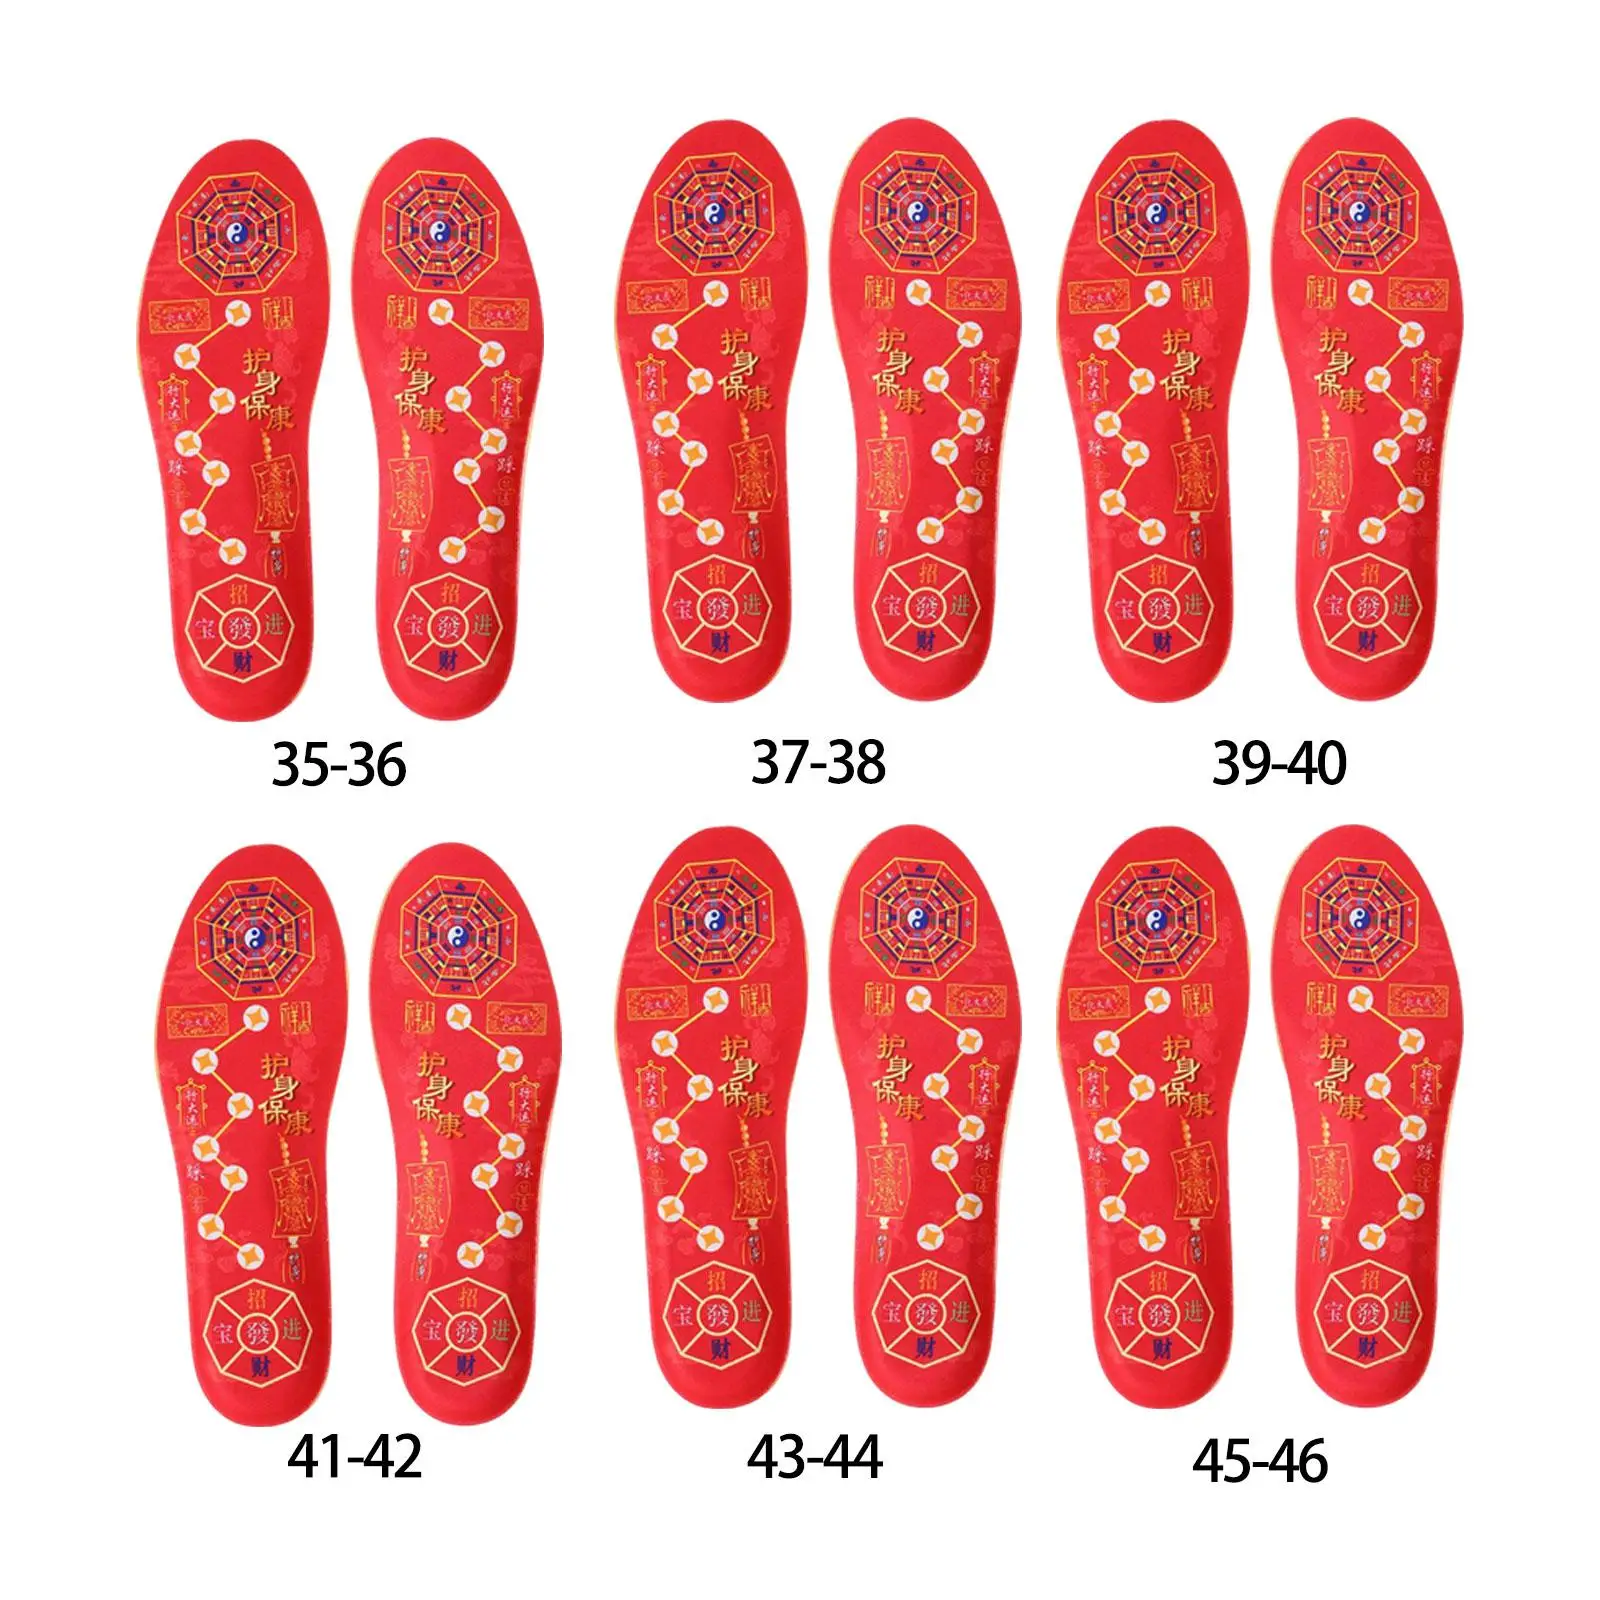 Cushion Insoles Men and Women Shock Absorption Foot Pads Replacement Soft Shoes Inserts for Sneakers Camping Backpacking Outdoor